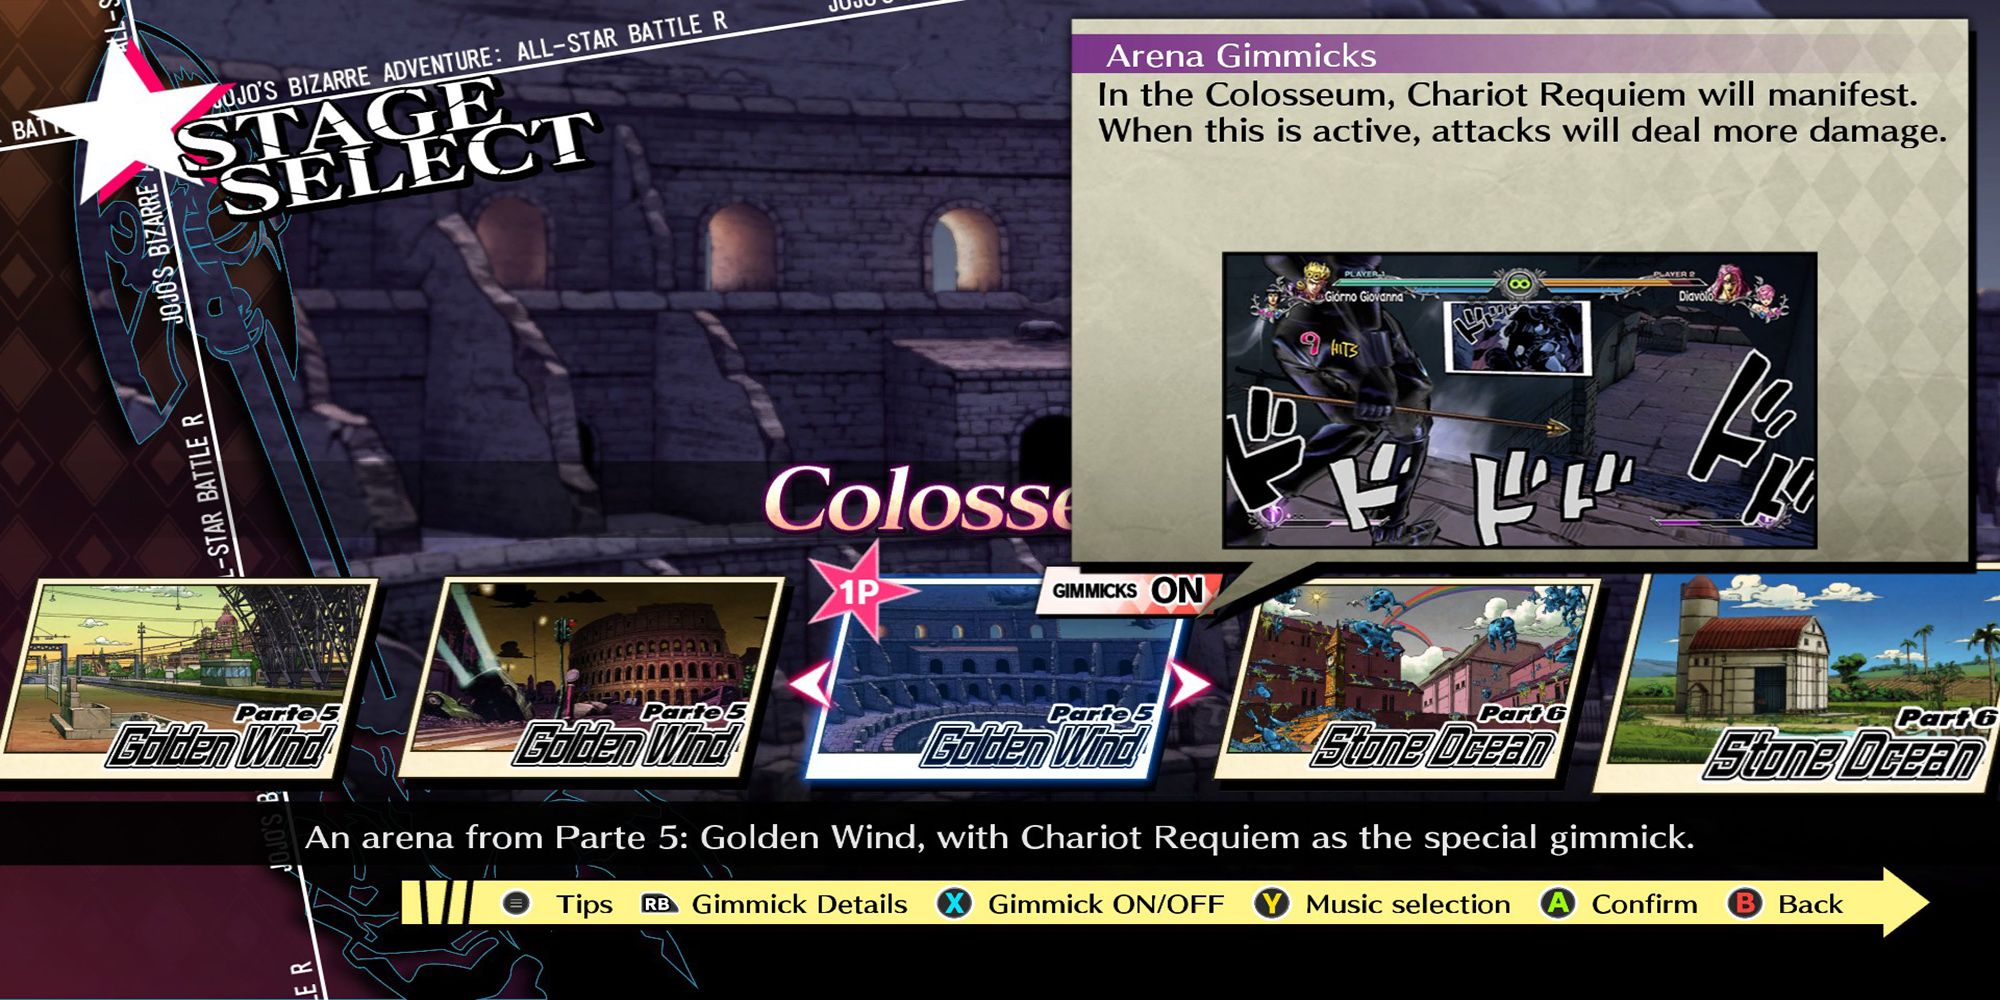 In JoJo's Bizarre Adventure: ASBR, the Colosseum's arena gimmick is an offensive power up from Chariot Requiem.